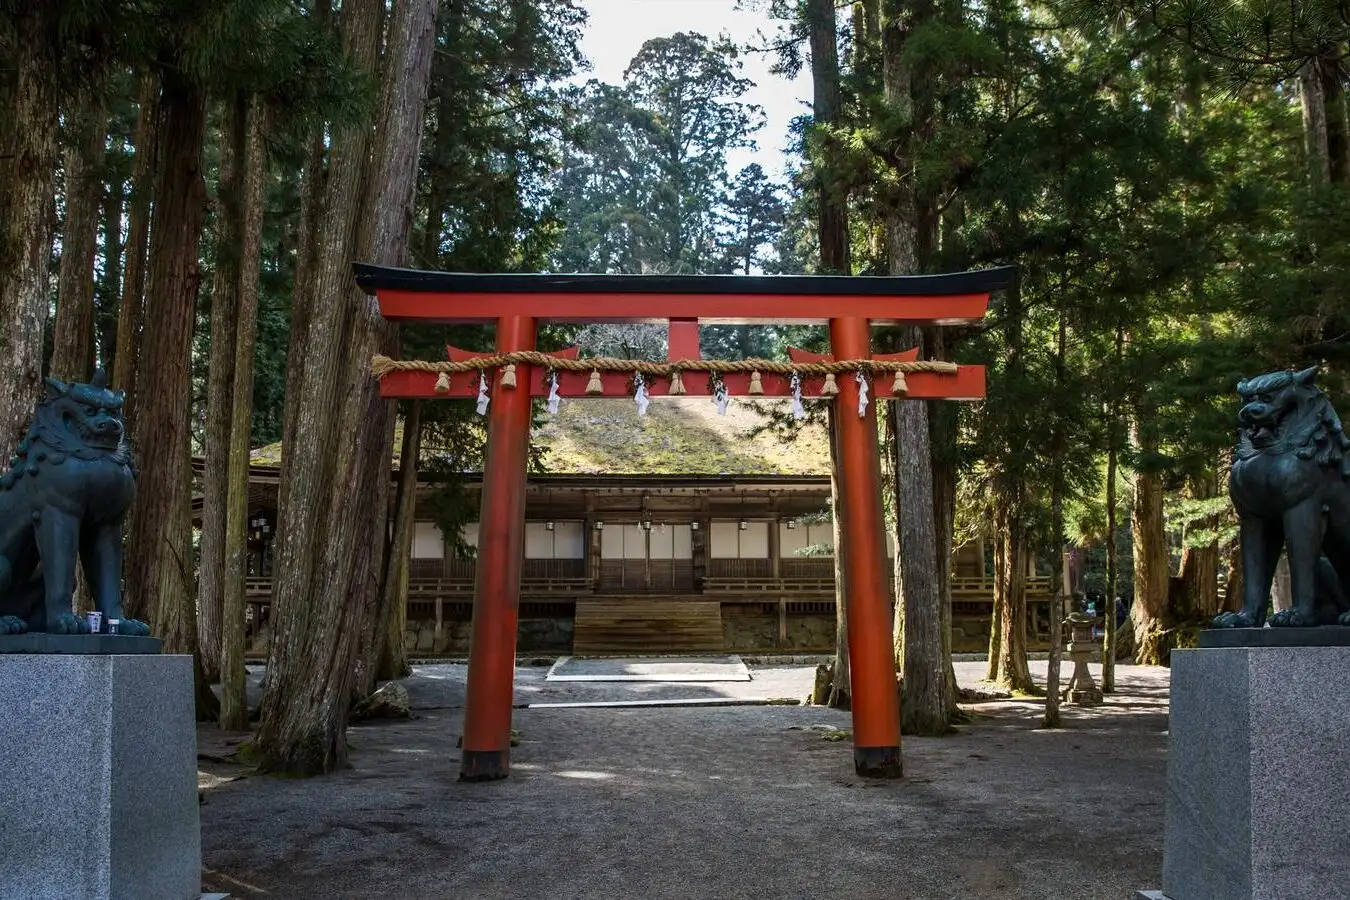 Entrance to a shrine in Japan